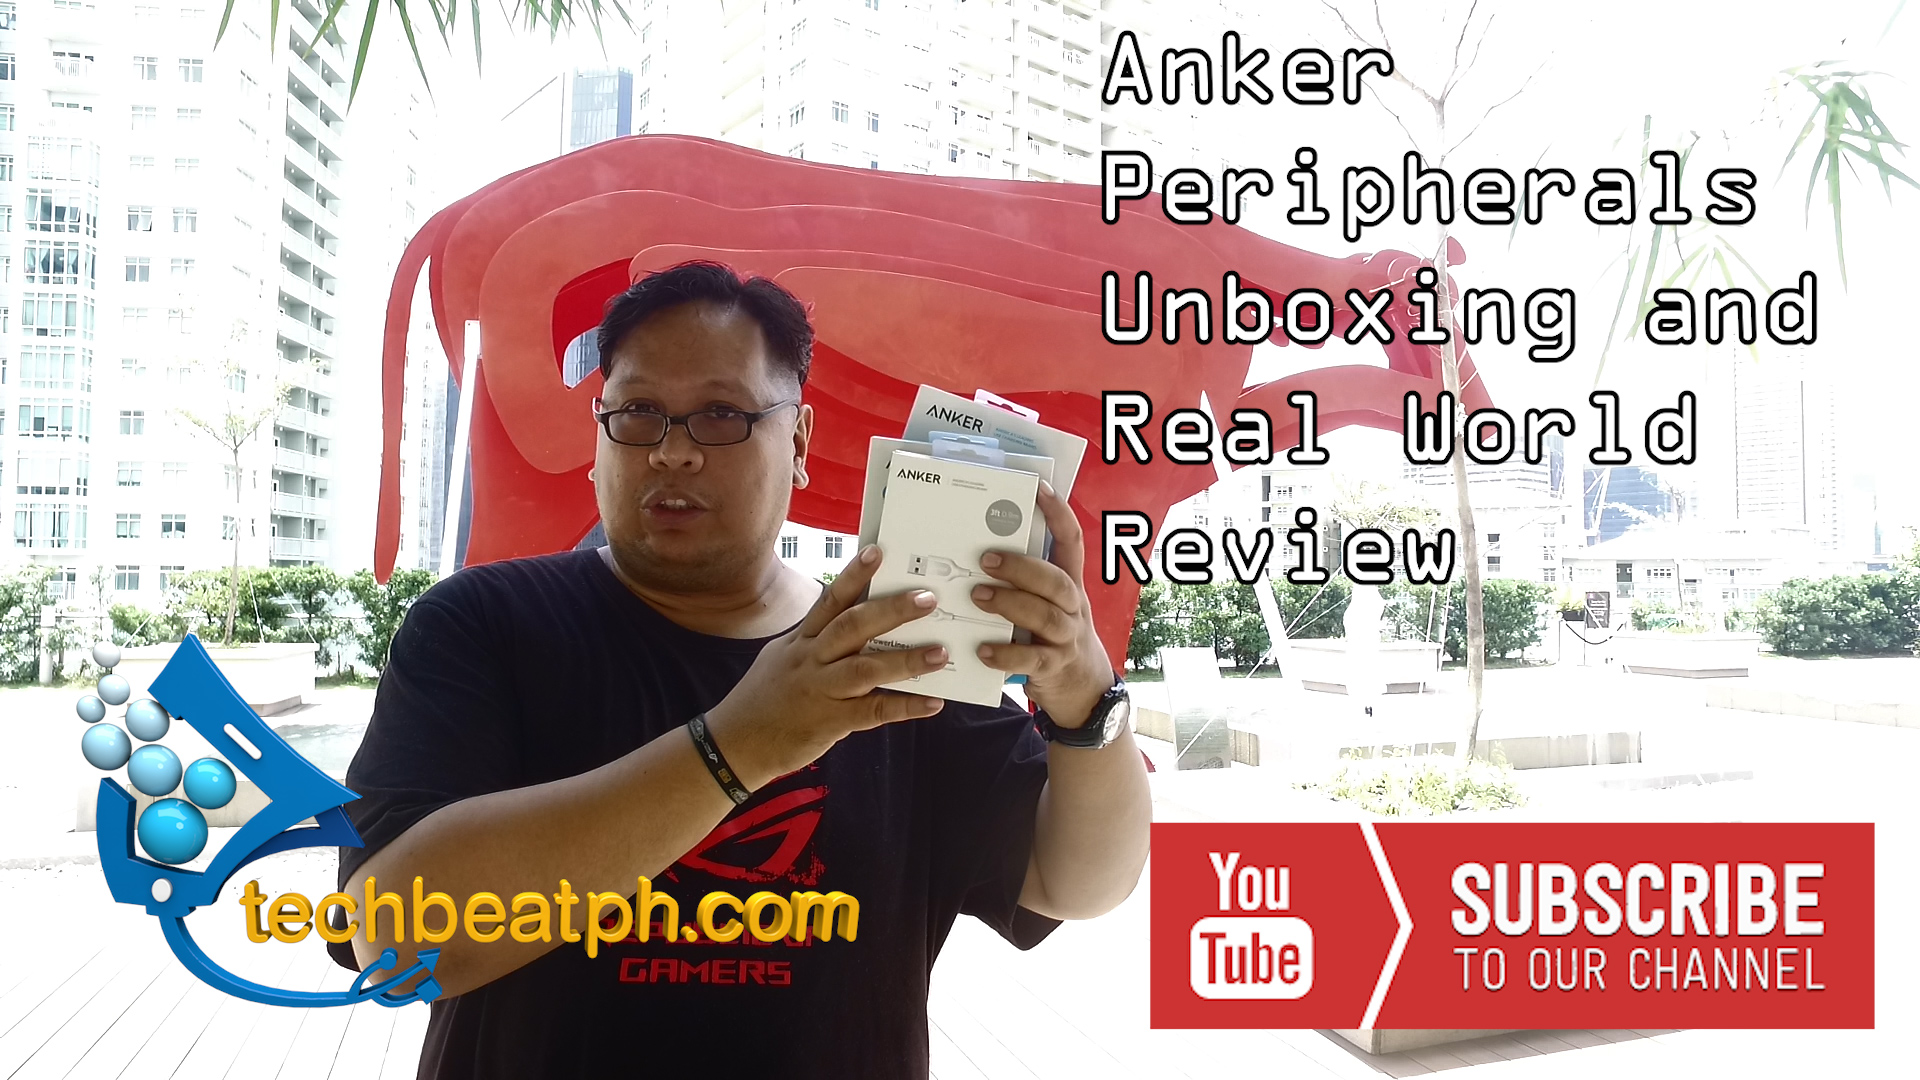 Anker Peripherals Unboxing and Real World Review